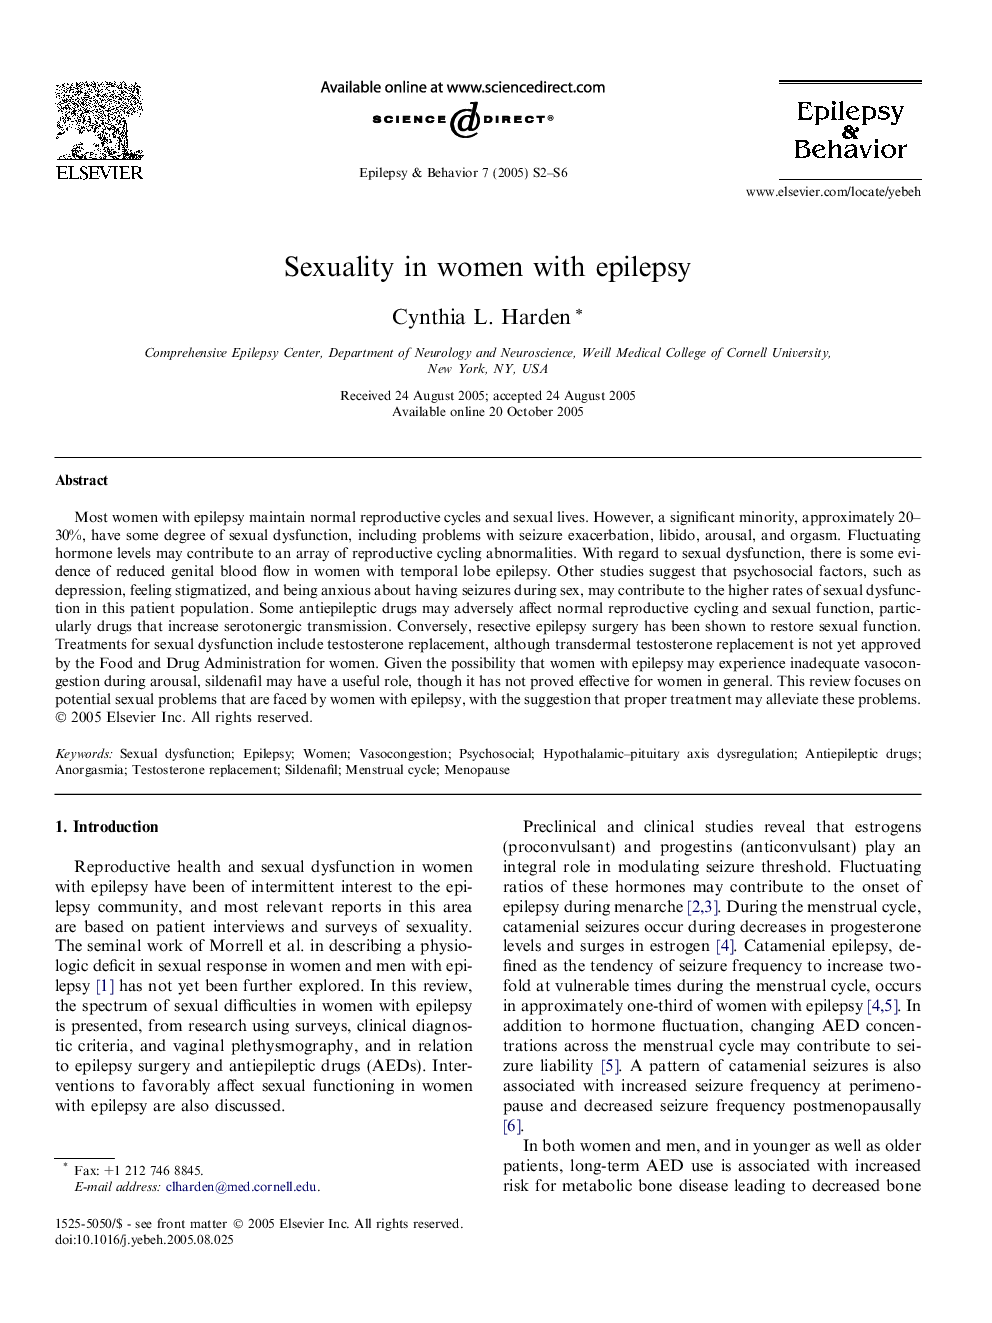 Sexuality in women with epilepsy